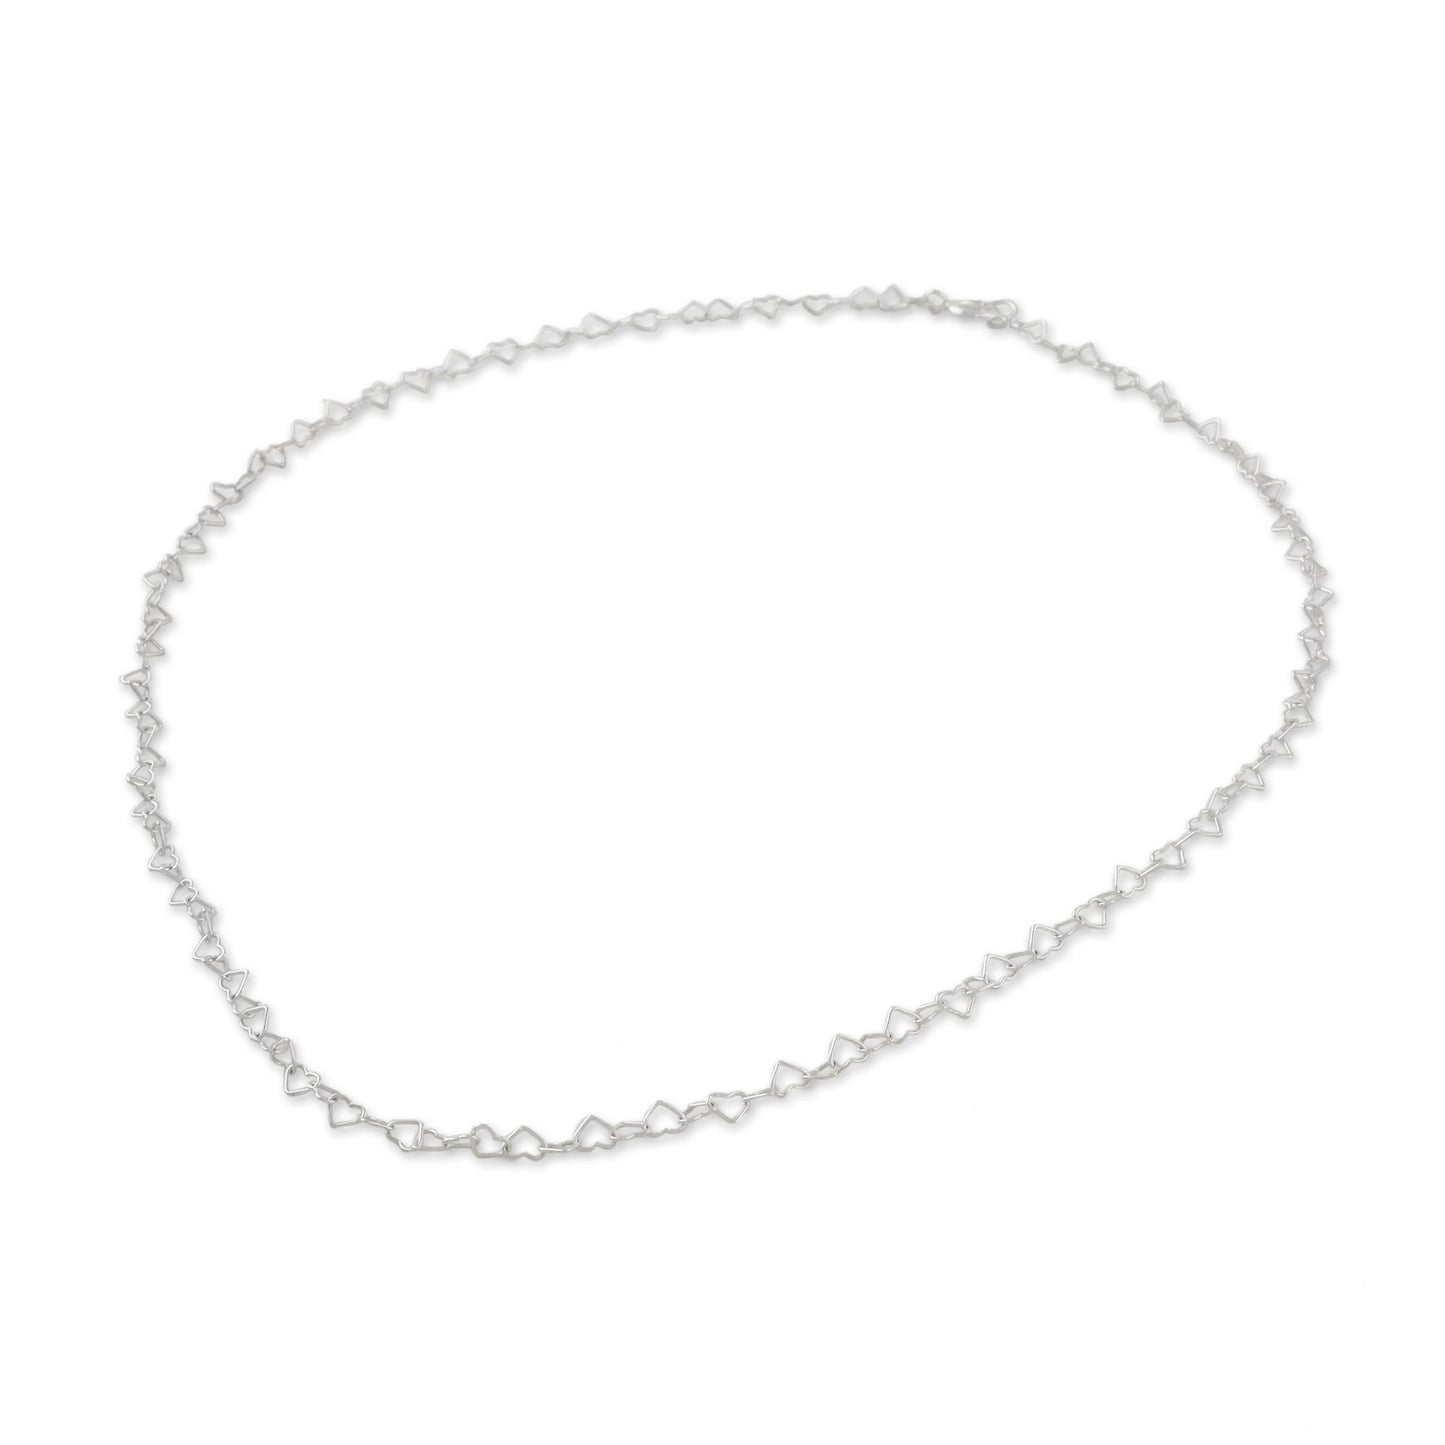 Lots of Love Sterling Silver Heart Link Necklace (3mm) from Thailand